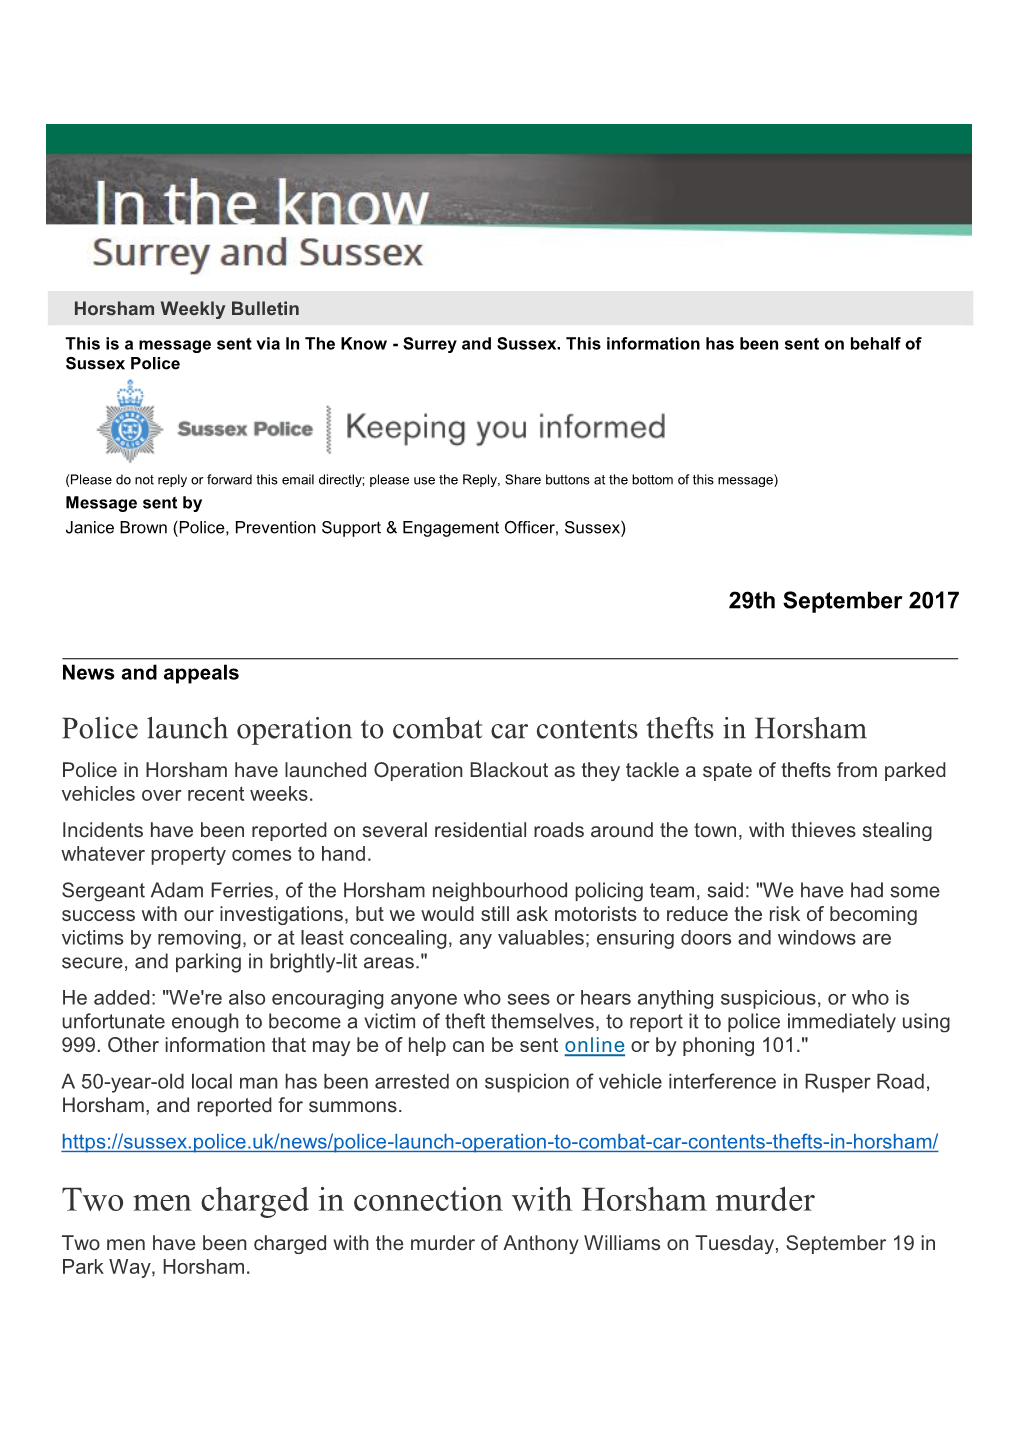 Two Men Charged in Connection with Horsham Murder Two Men Have Been Charged with the Murder of Anthony Williams on Tuesday, September 19 in Park Way, Horsham